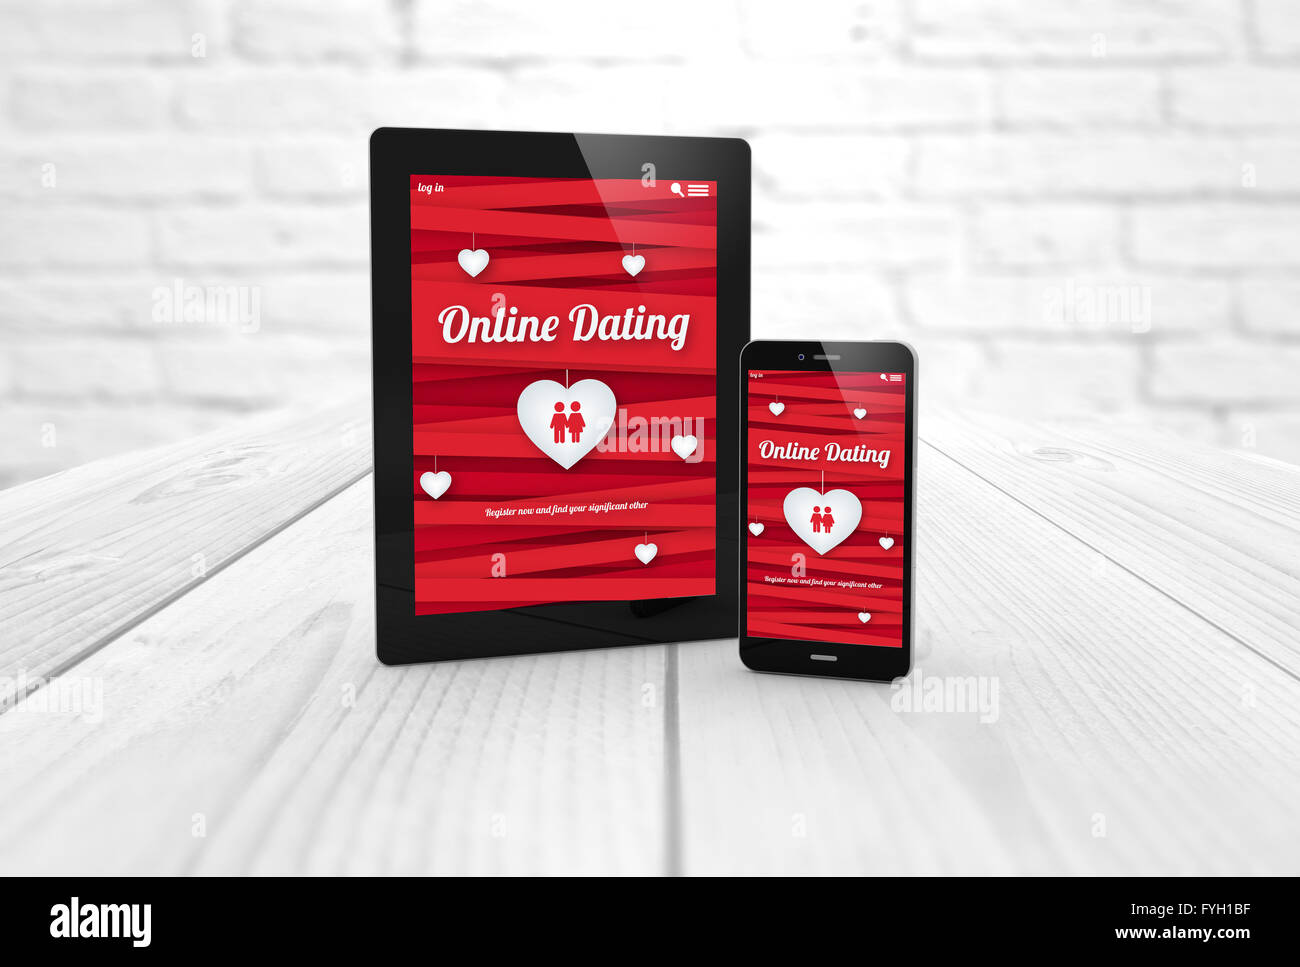 Online dating website on a digital generated tablet display  and smartphone. All screen graphics are made up. Stock Photo